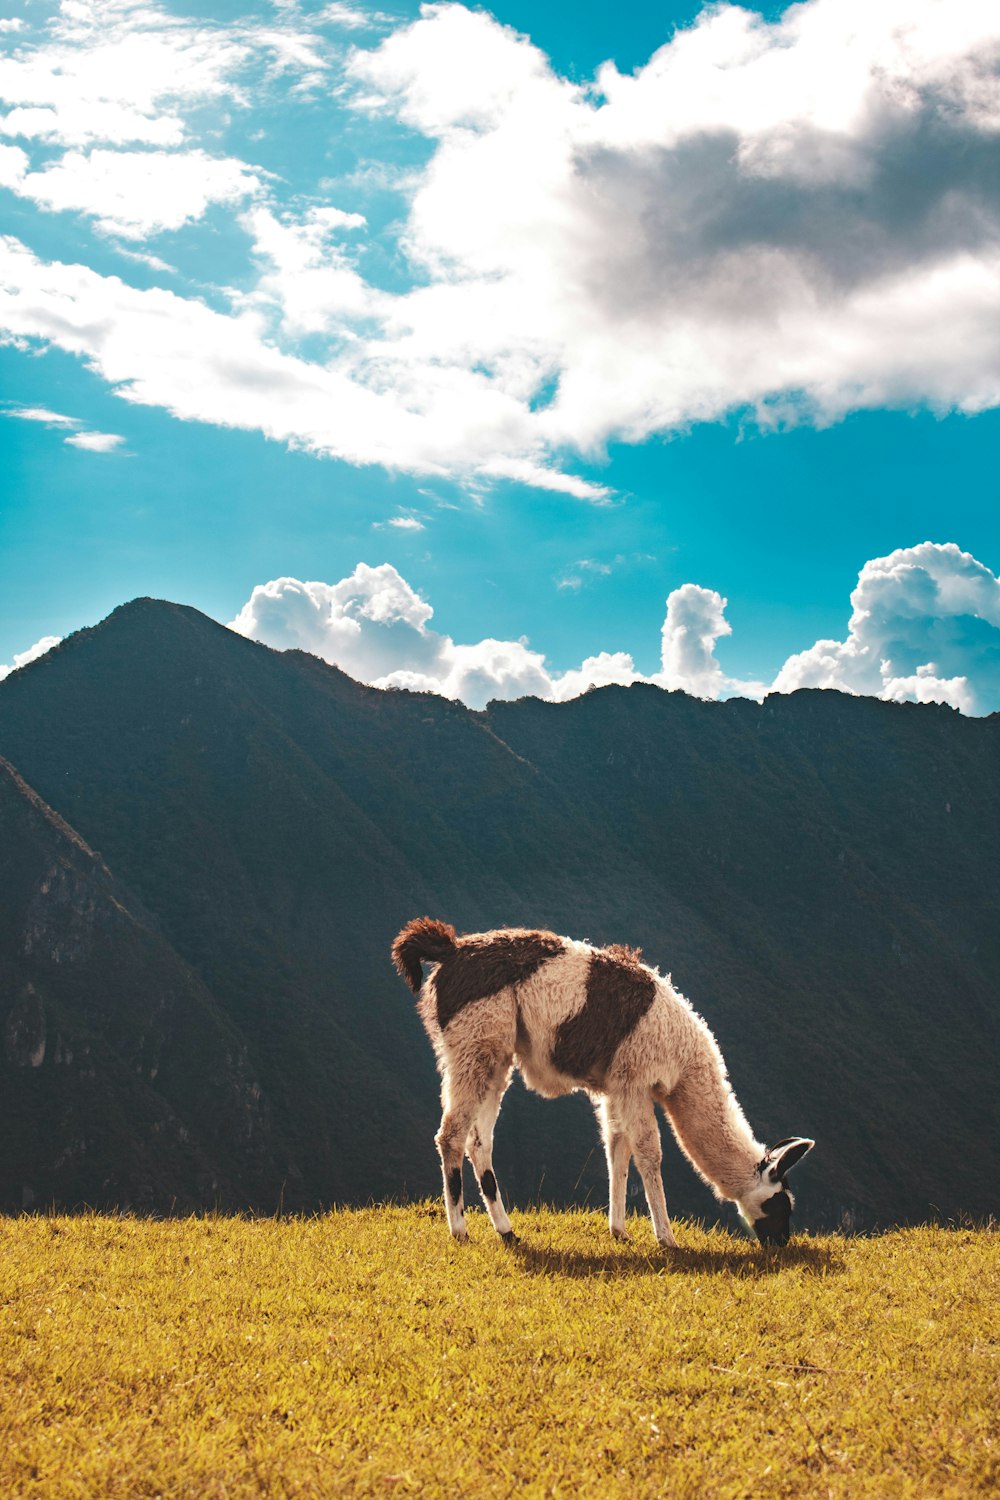 white and brown sheep on green grass field near mountain under blue and white cloudy sky